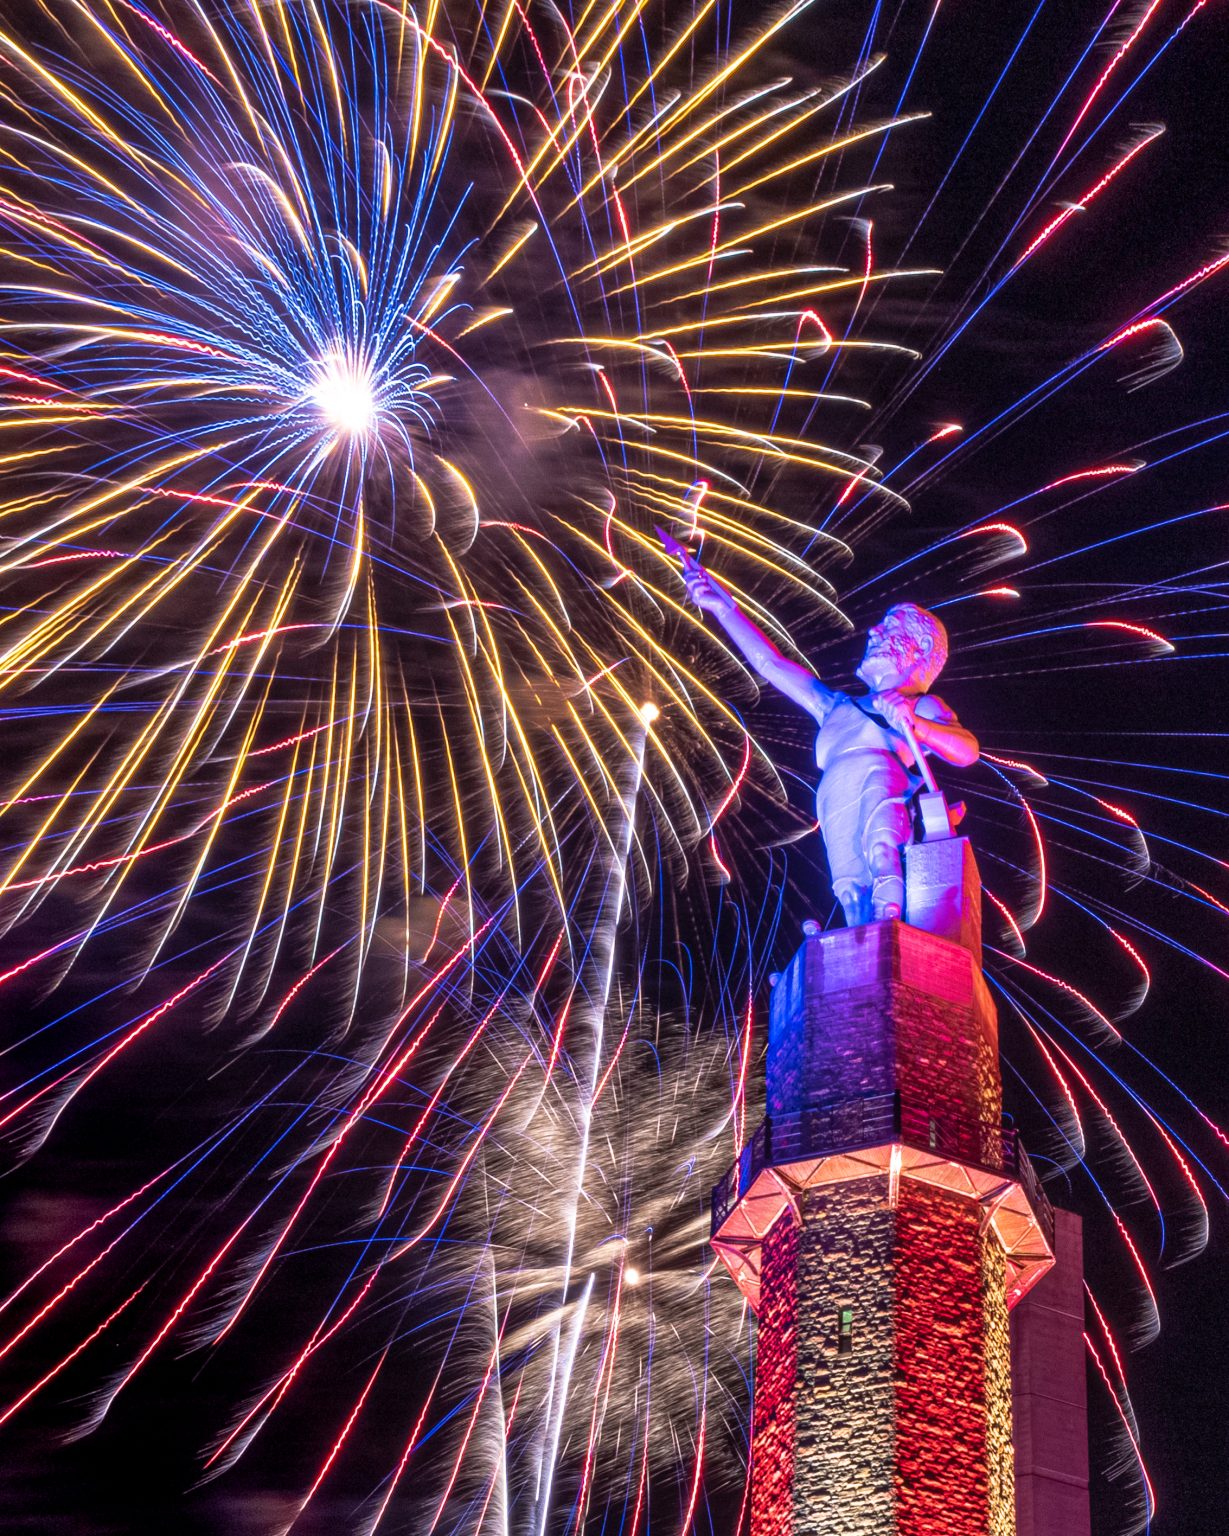 Vulcan Park and Museum to Host the City’s Fourth of July Celebration